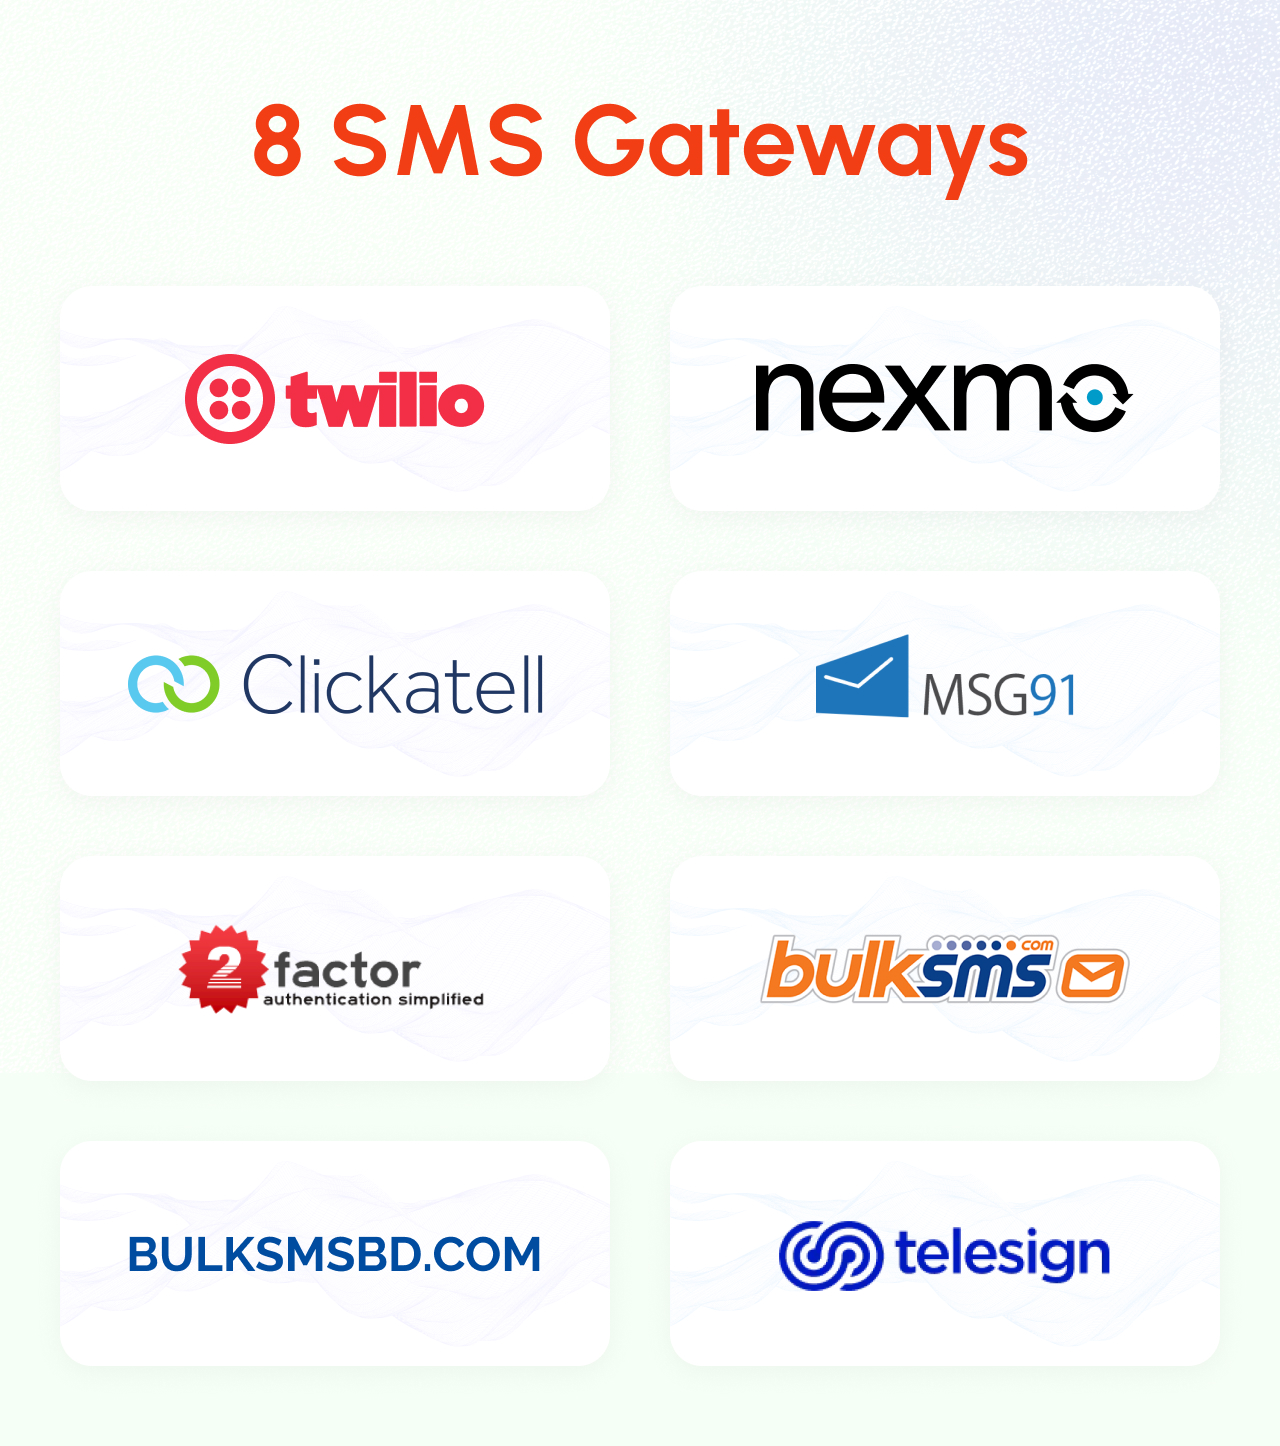 SMS Gateways included with ShopKing are Twilio, nexmo, bulk sms, clickatell, msg91, 2factor, bulksms bd, telesign etc